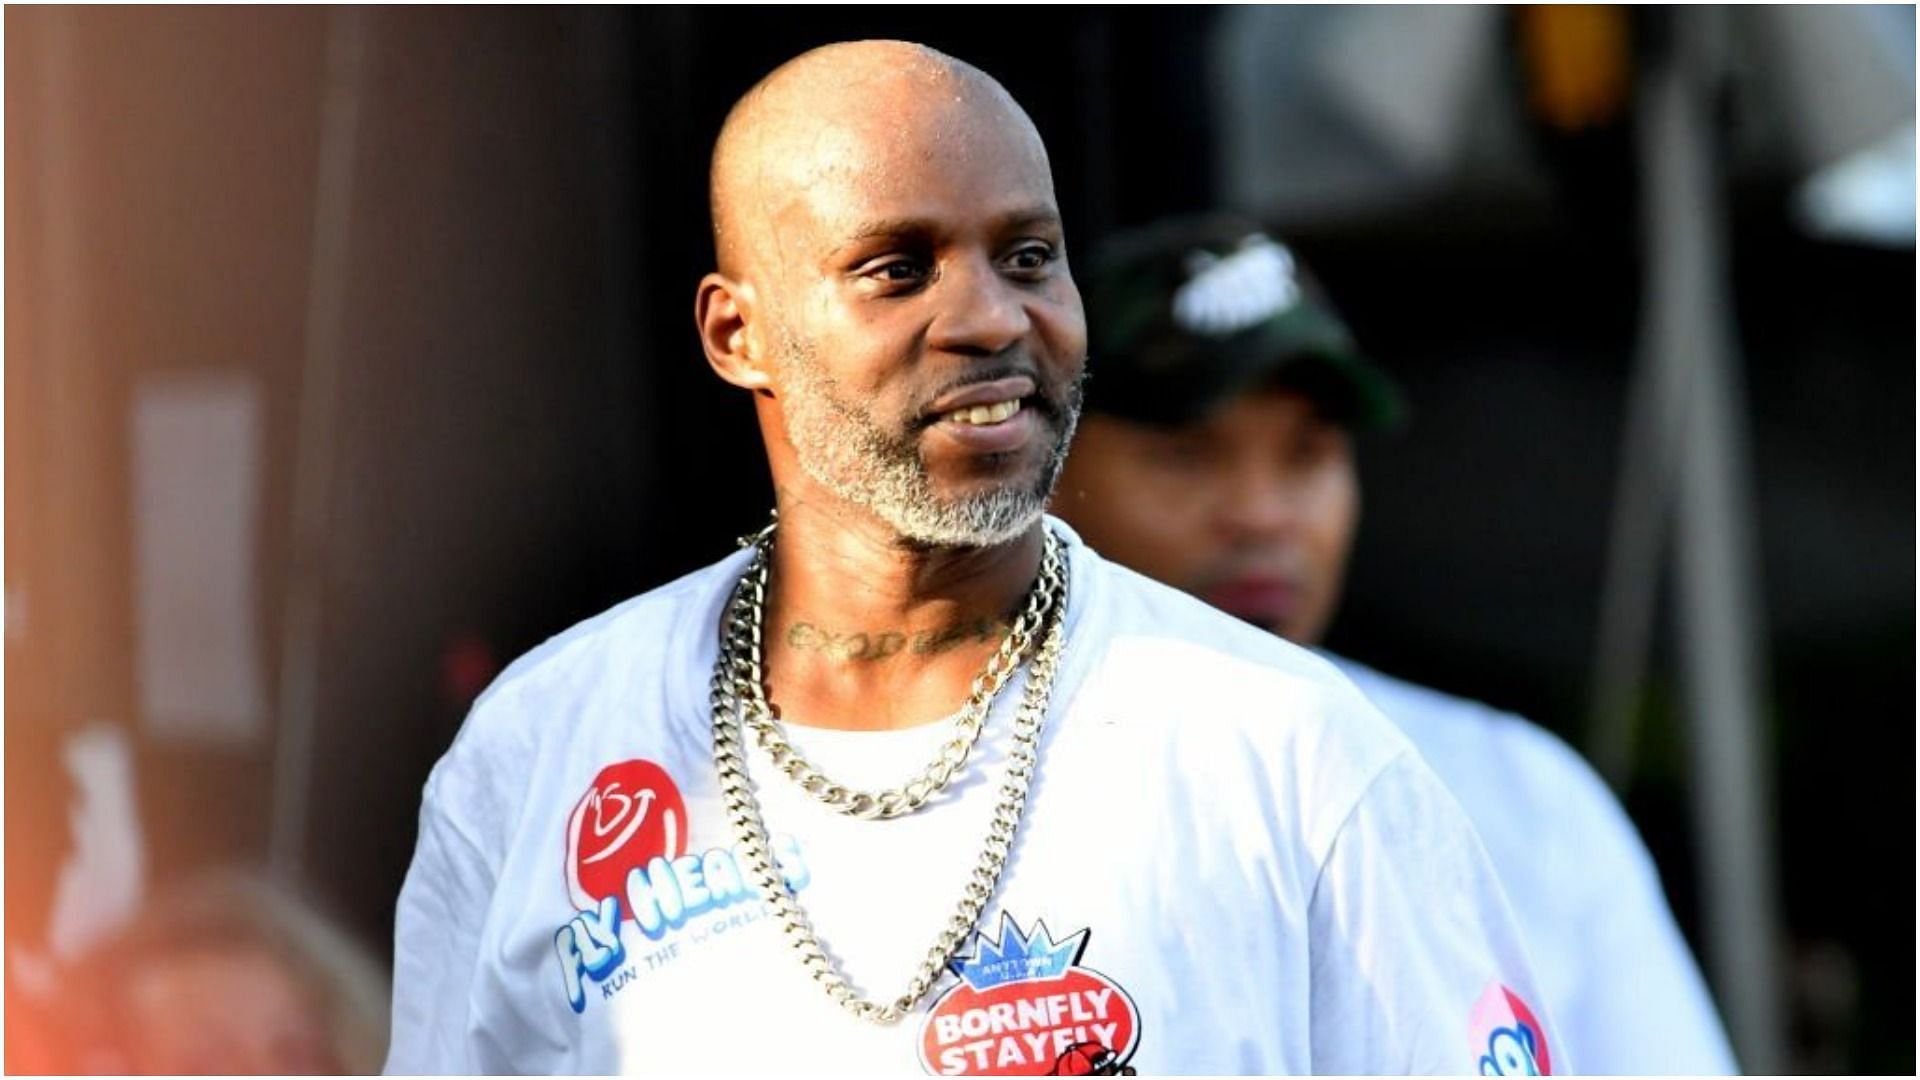 DMX is the father of 15 children (Image via Prince Williams/Getty Images)